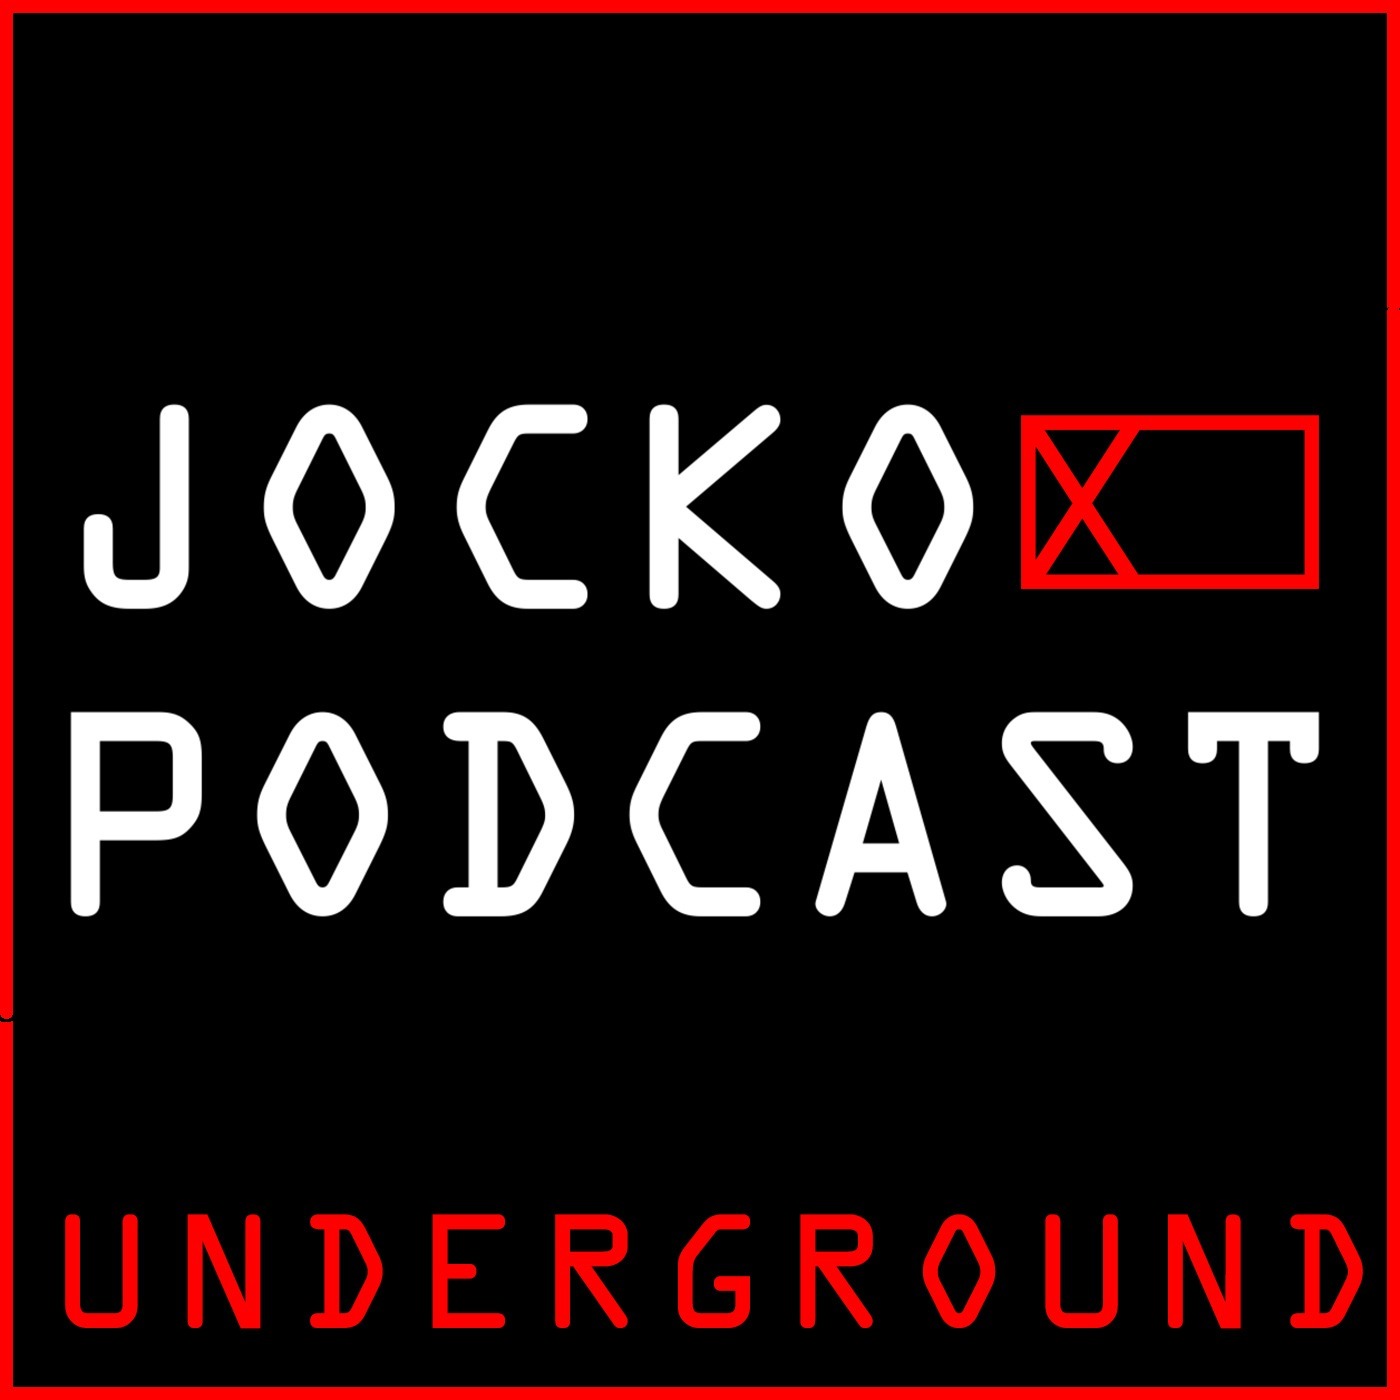 Jocko Underground: People Are Like Terrain to be Used For Advantage | Getting Back on The Horse